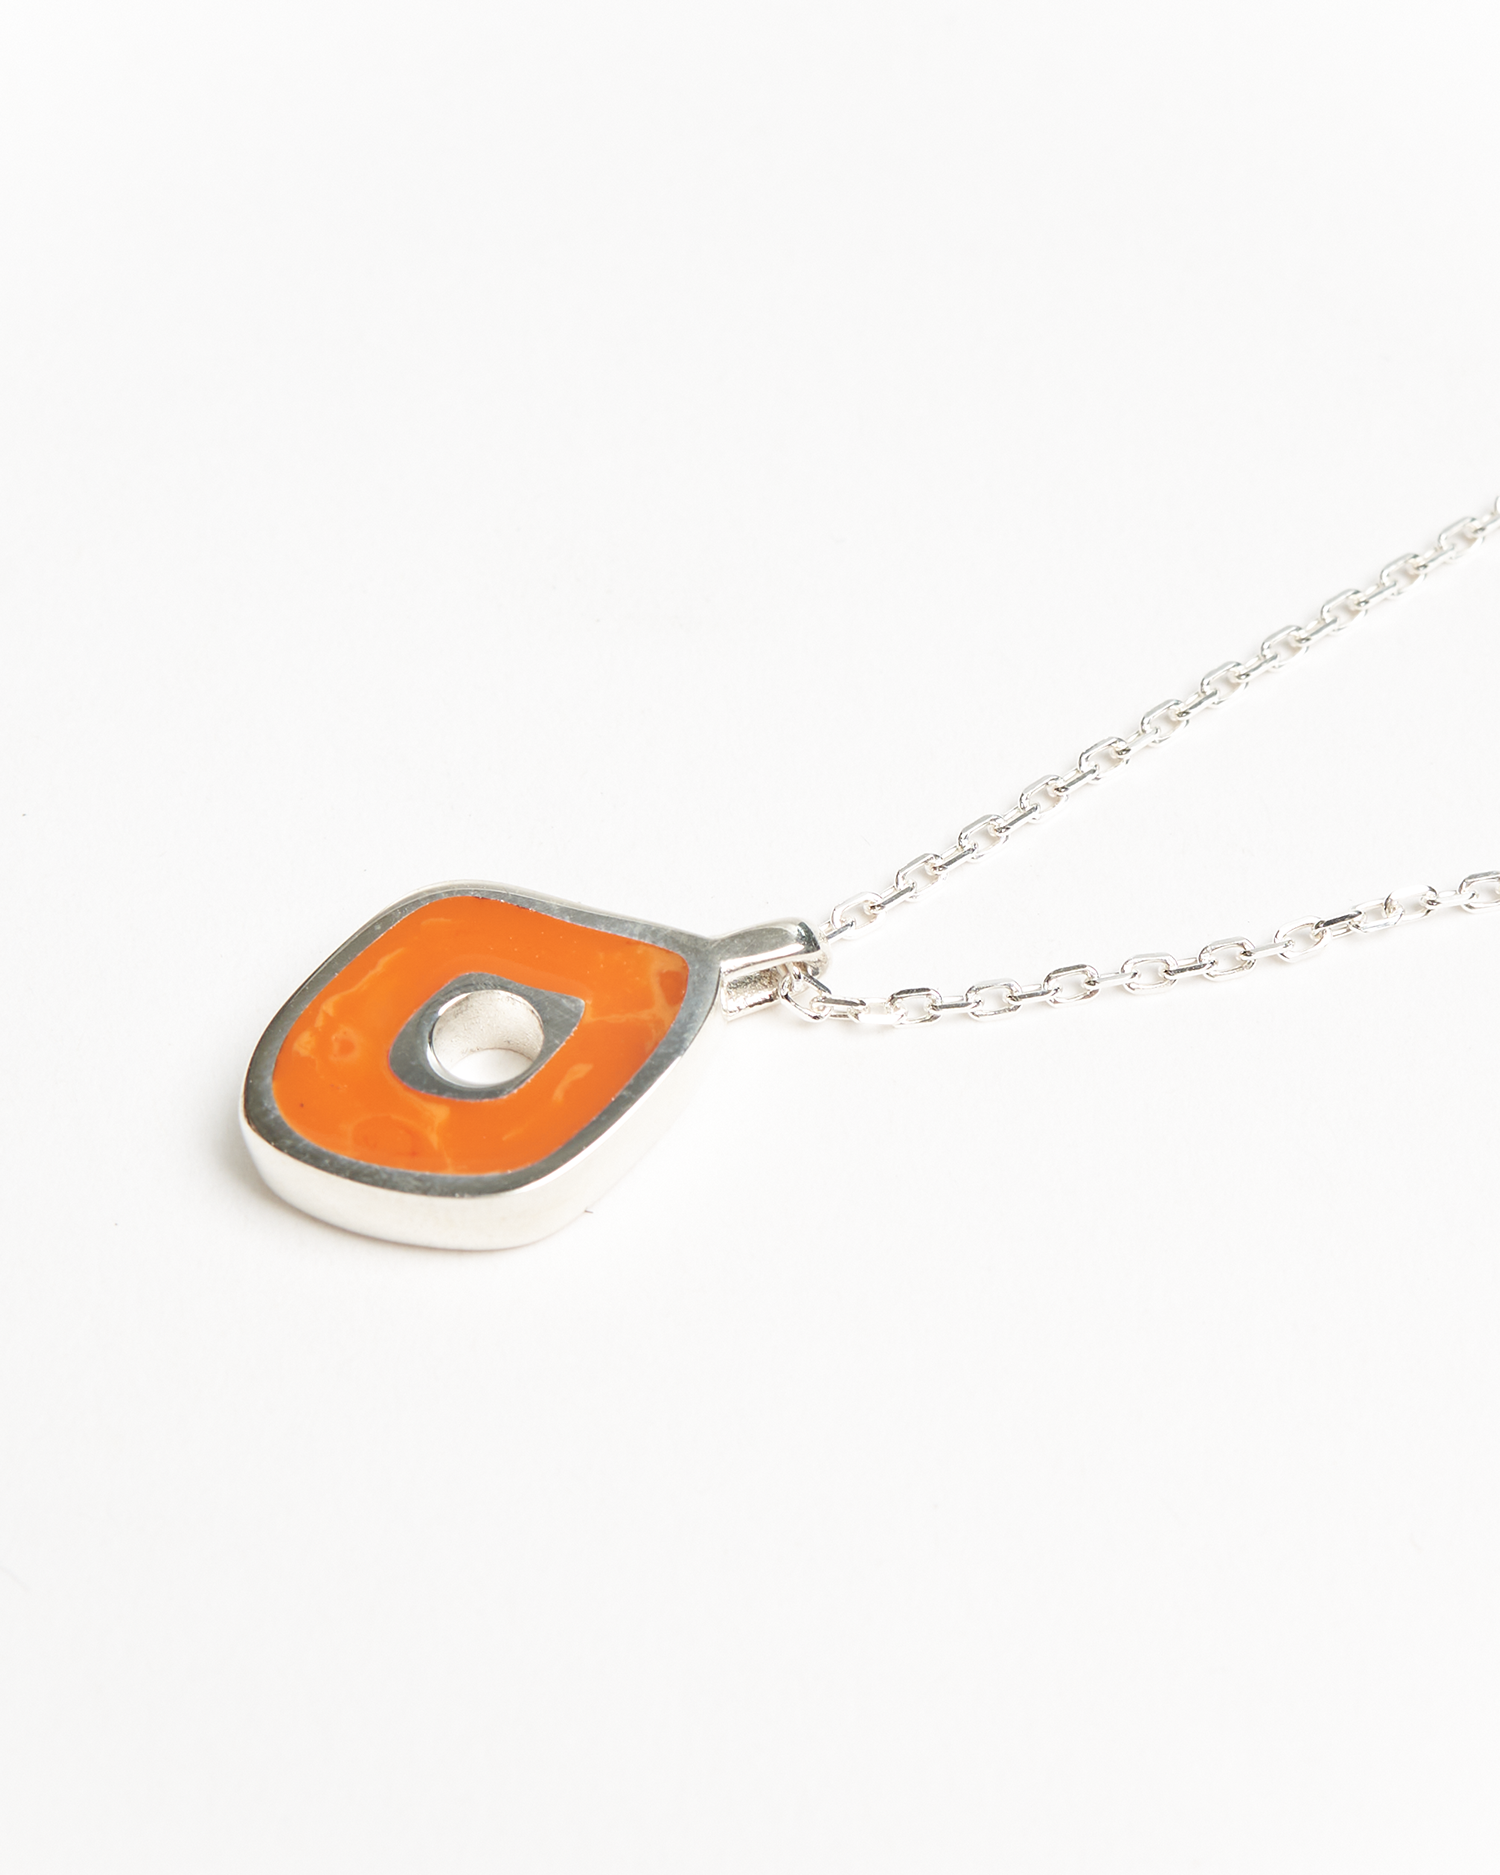 Irregular Pendant With Chain - 925 Sterling Silver / Orange Resin